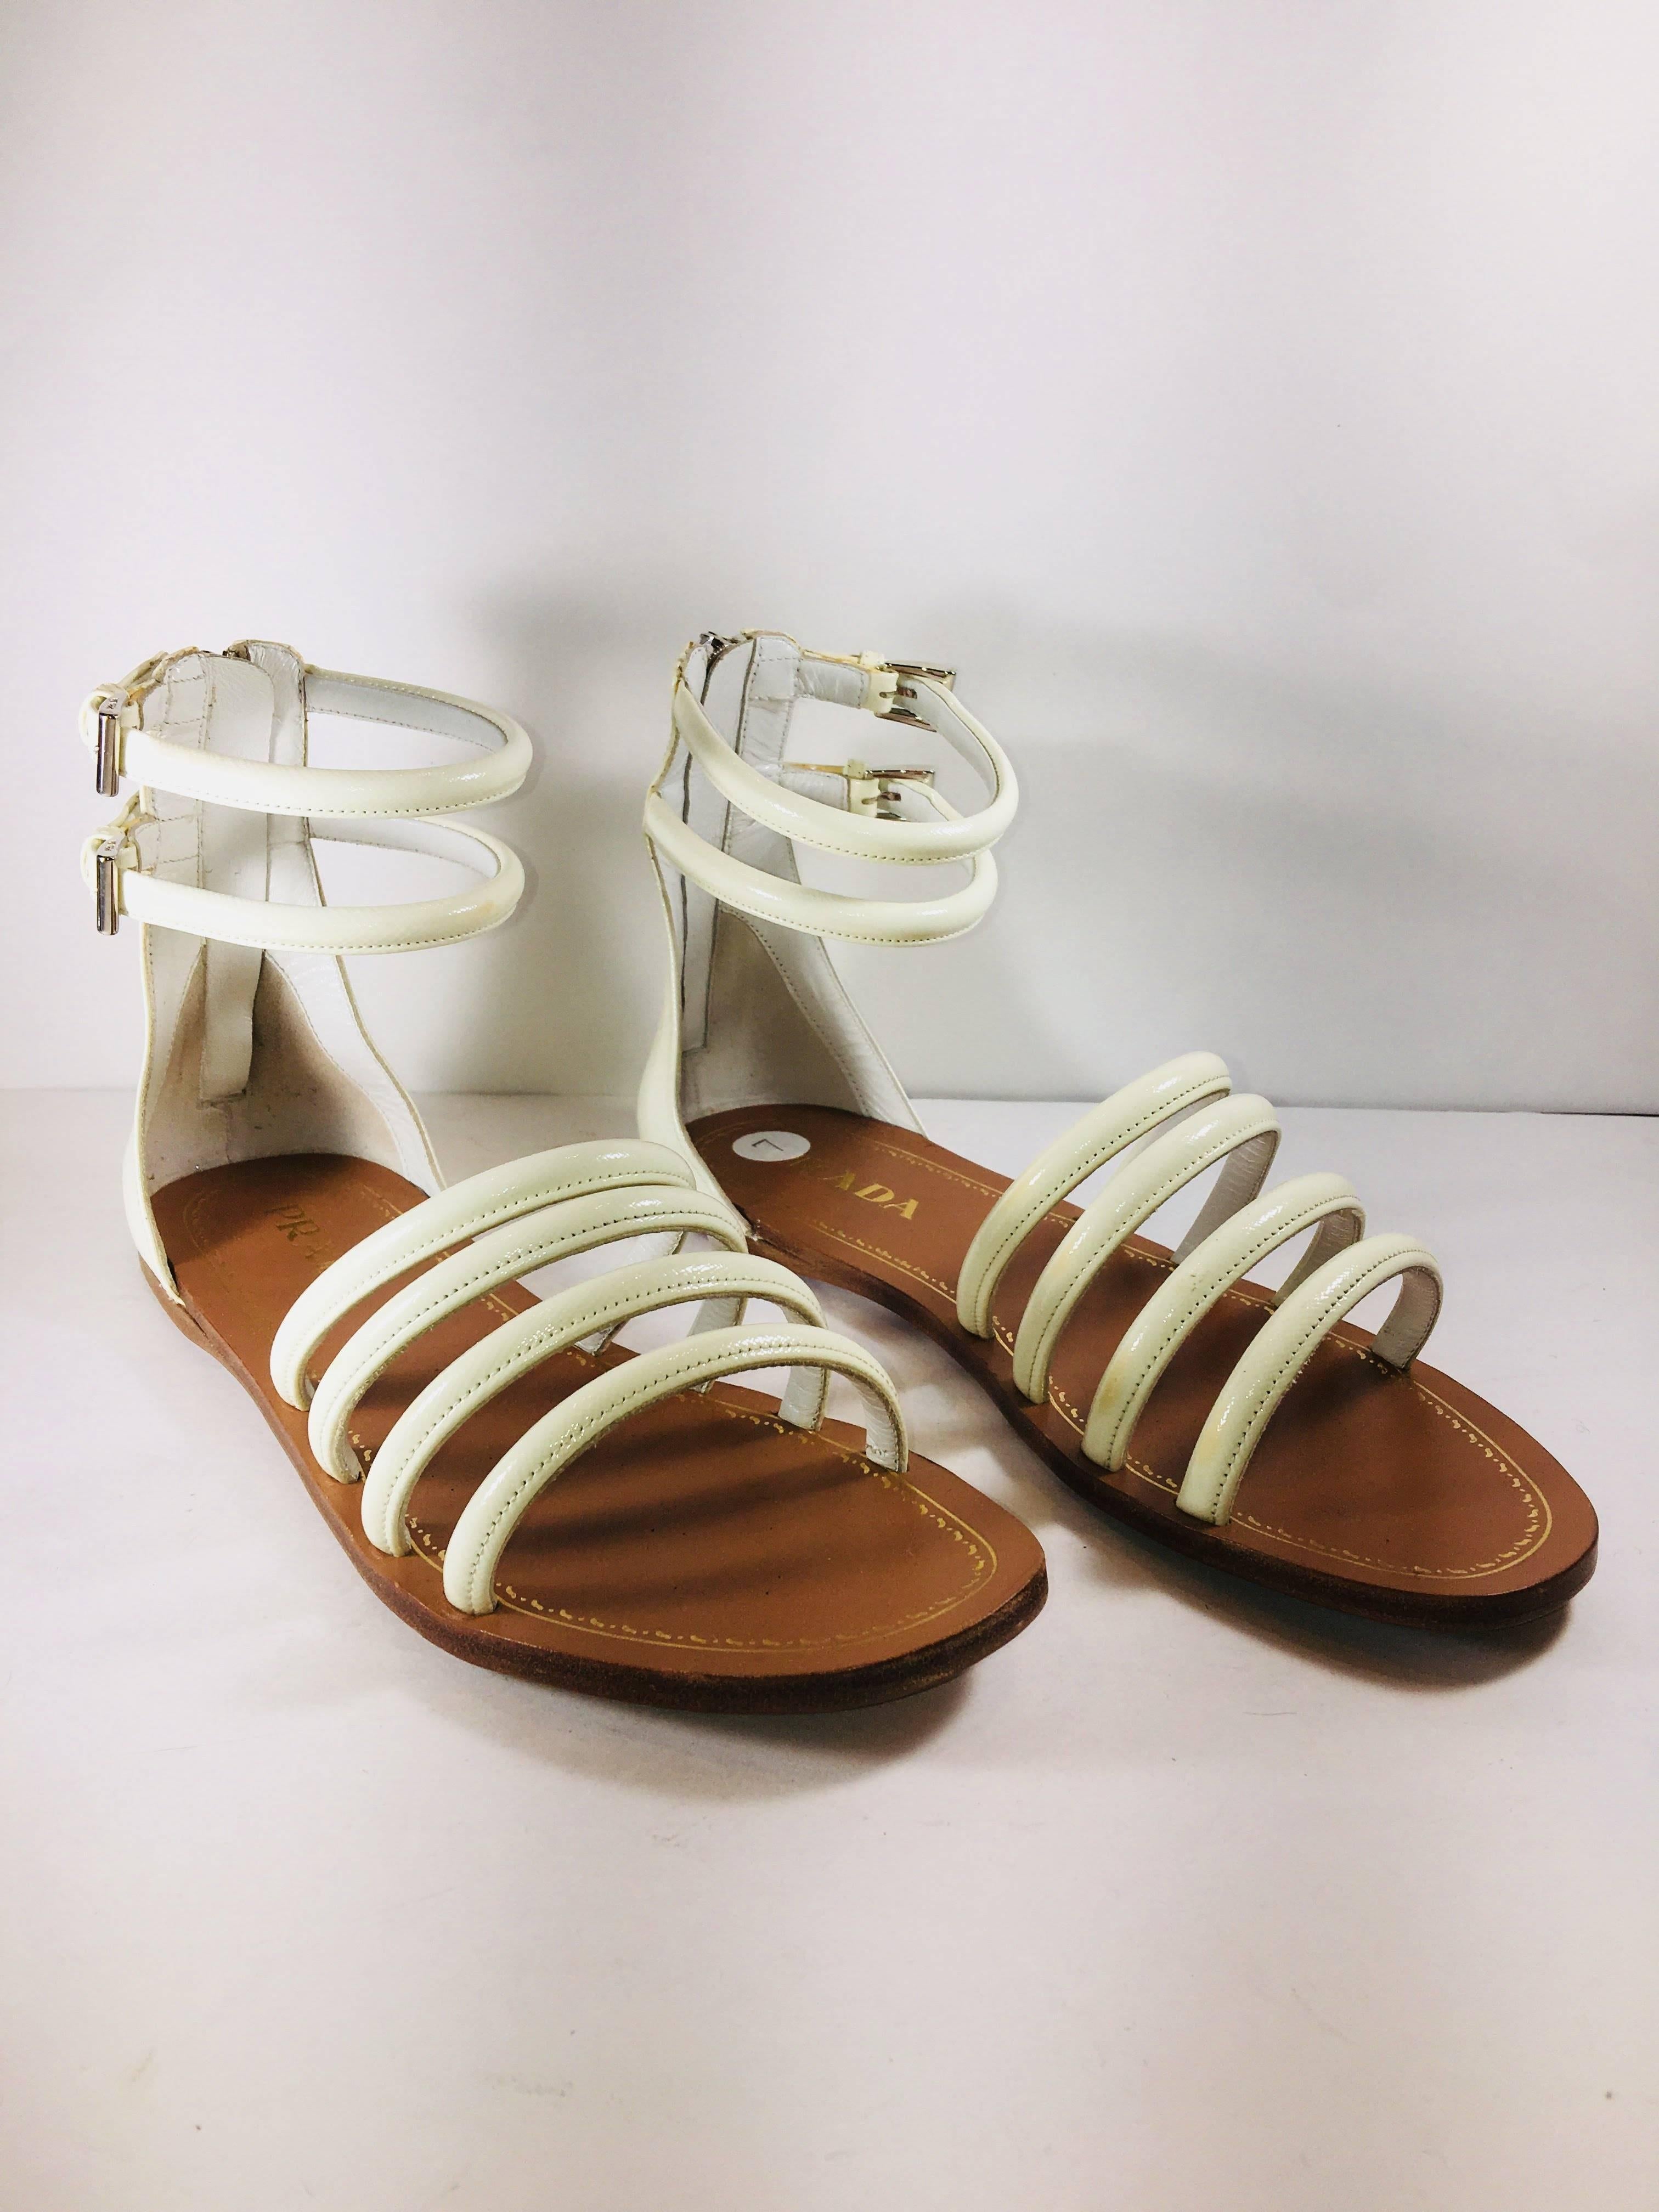 Prada Open Toe Sandal with White Double Ankle Strap with Buckles and Back Zipper.